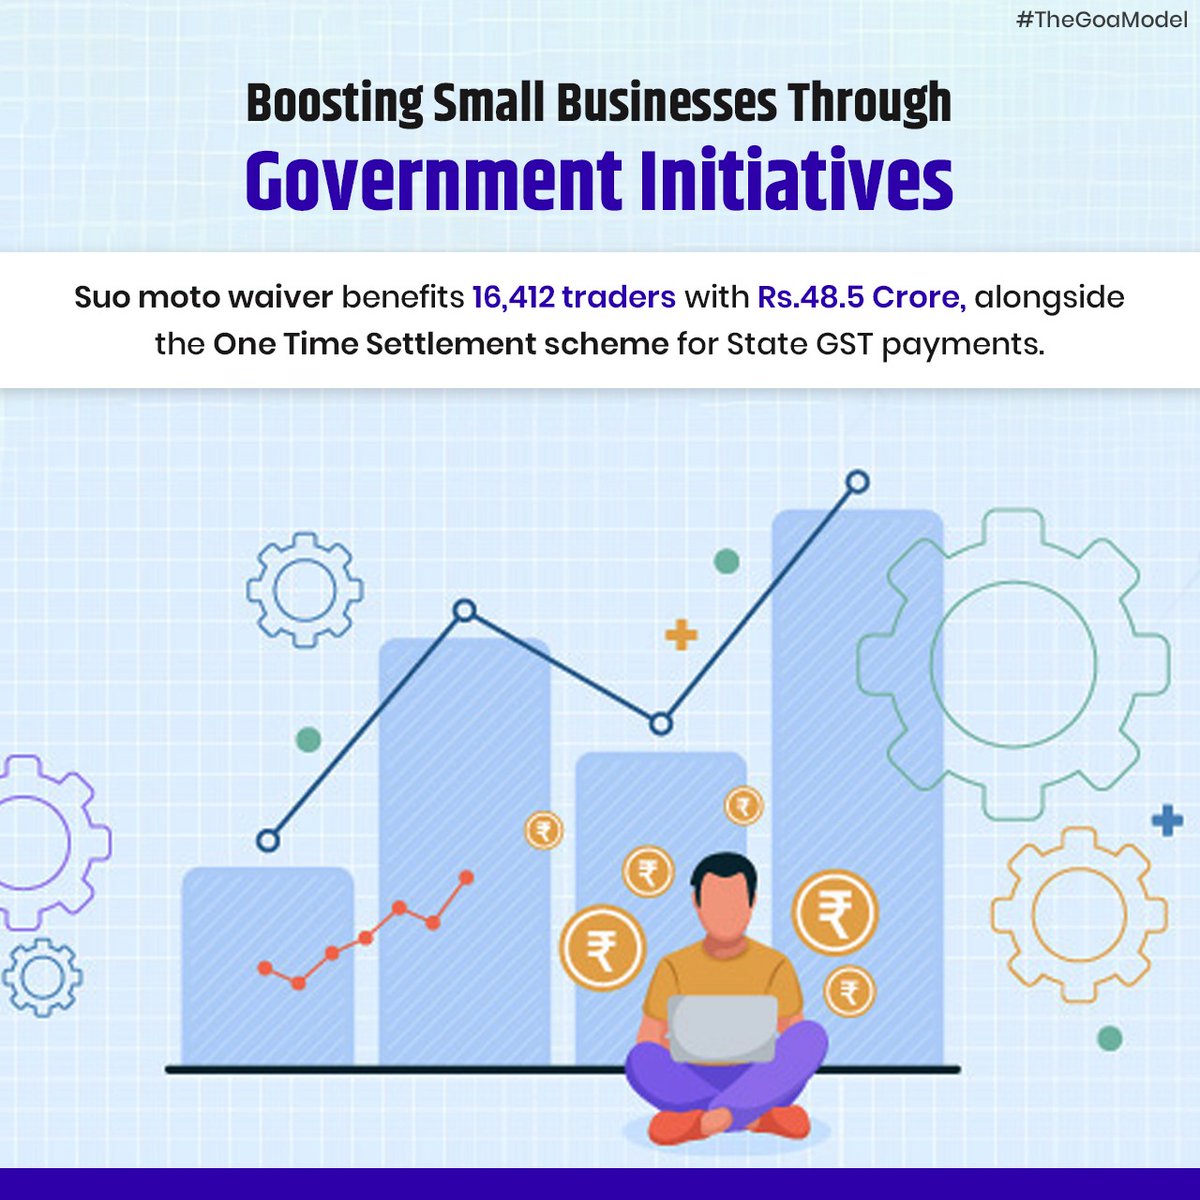 Government initiatives like the Suo moto waiver and One Time Settlement scheme are supporting small businesses in Goa, easing financial burdens and fostering growth. #SmallBusinesses #GovernmentSupport #TheGoaModel
#GovernmentInitiatives #SuoMotoWaiver #OneTimeSettlement  #Goa